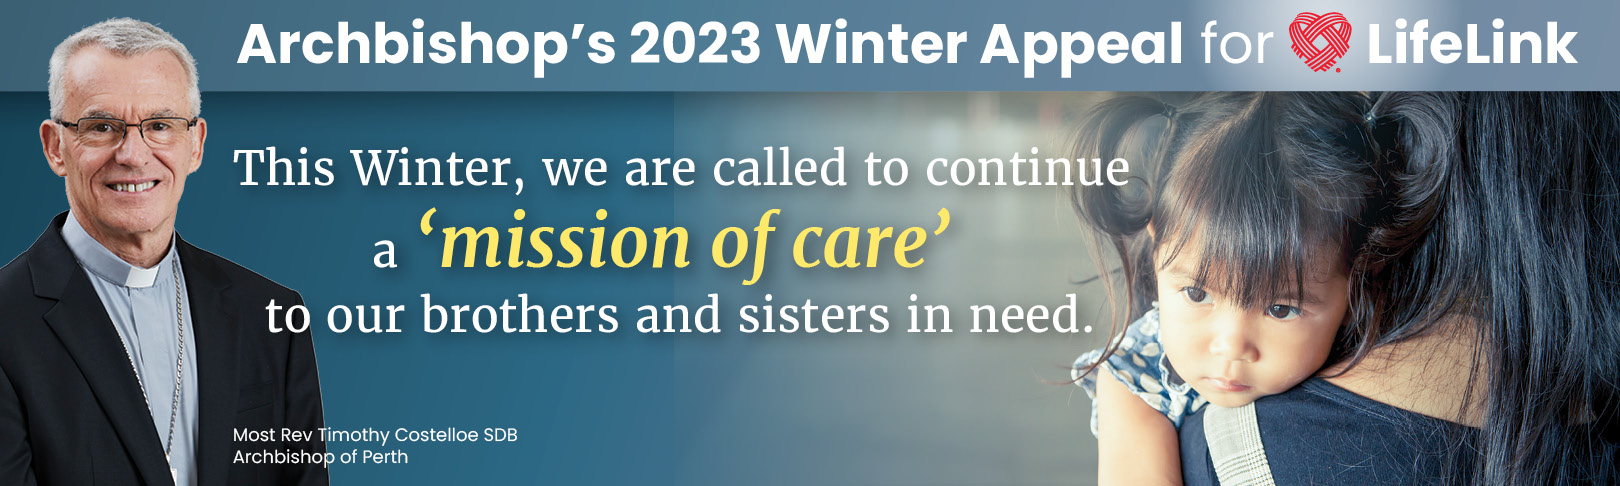 Archbishop’s 2023 Winter Appeal for LifeLink This Winter, we are called to continue a ‘mission of care’ to our brothers and sisters in need.